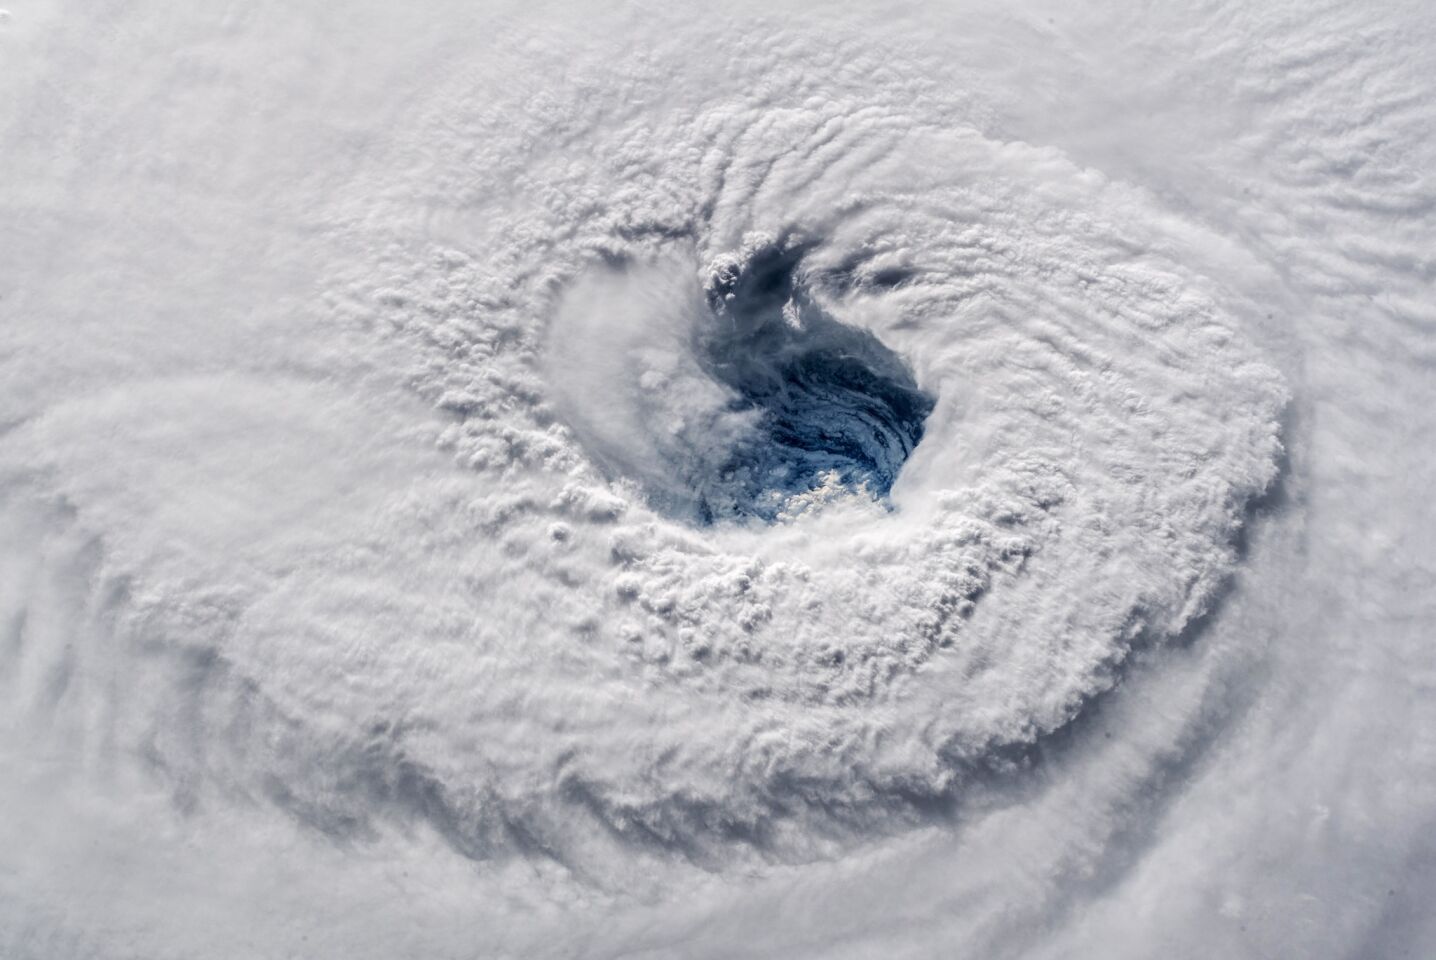 In this Sept. 12, 2018 photo provided by NASA, Hurricane Florence churns over the Atlantic Ocean heading for the U.S. east coast as seen from the International Space Station. Astronaut Alexander Gerst, who shot the photo, tweeted: "Ever stared down the gaping eye of a category 4 hurricane? It's chilling, even from space."